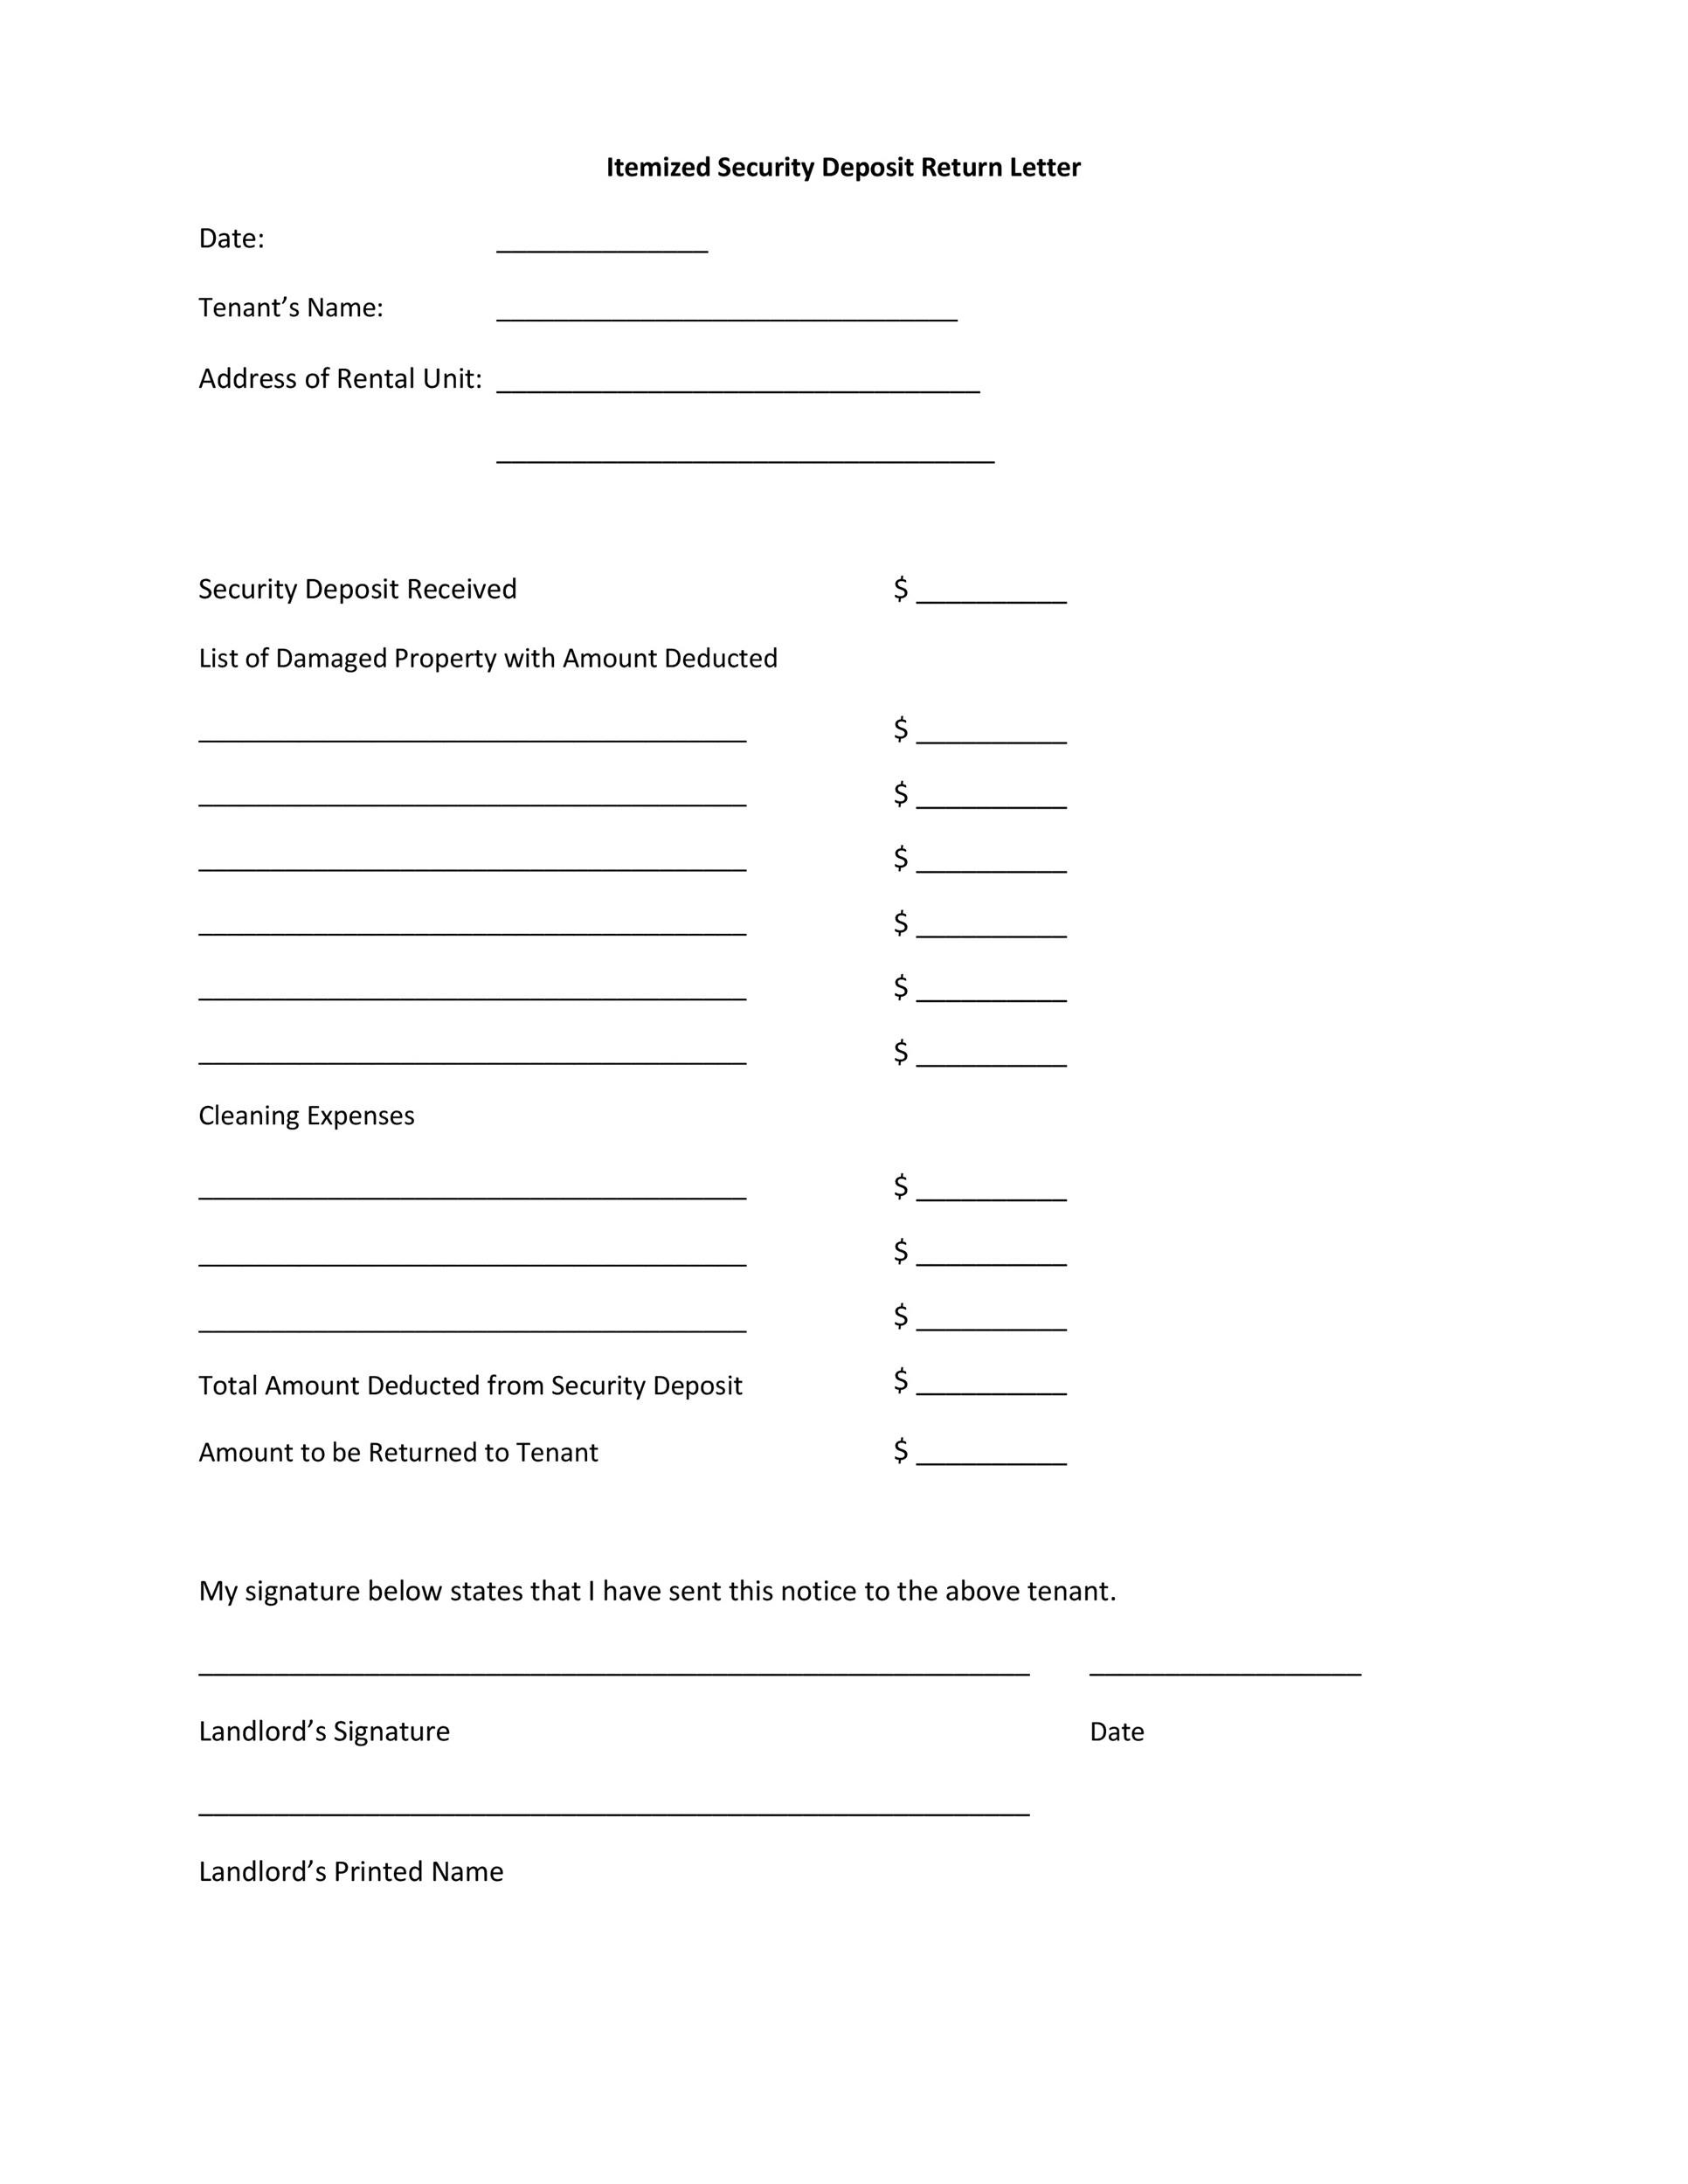 10 Effective Security Deposit Return Letters [MS Word] ᐅ TemplateLab Throughout Security Deposit Return Letter Template For Security Deposit Return Letter Template